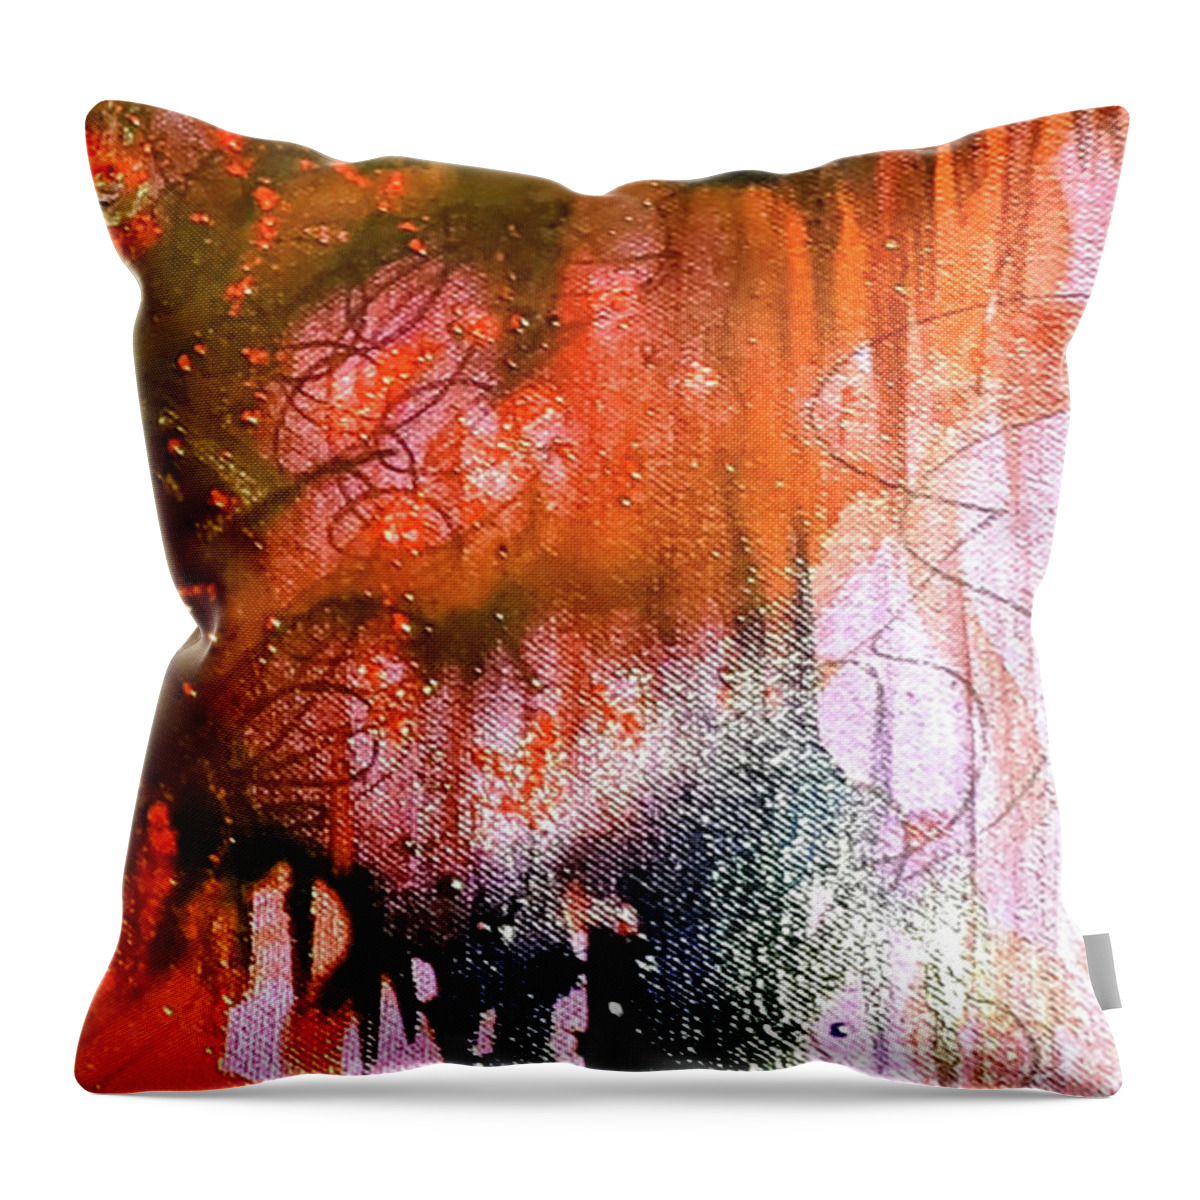  Throw Pillow featuring the painting Untitled #16 by Karen Lillard